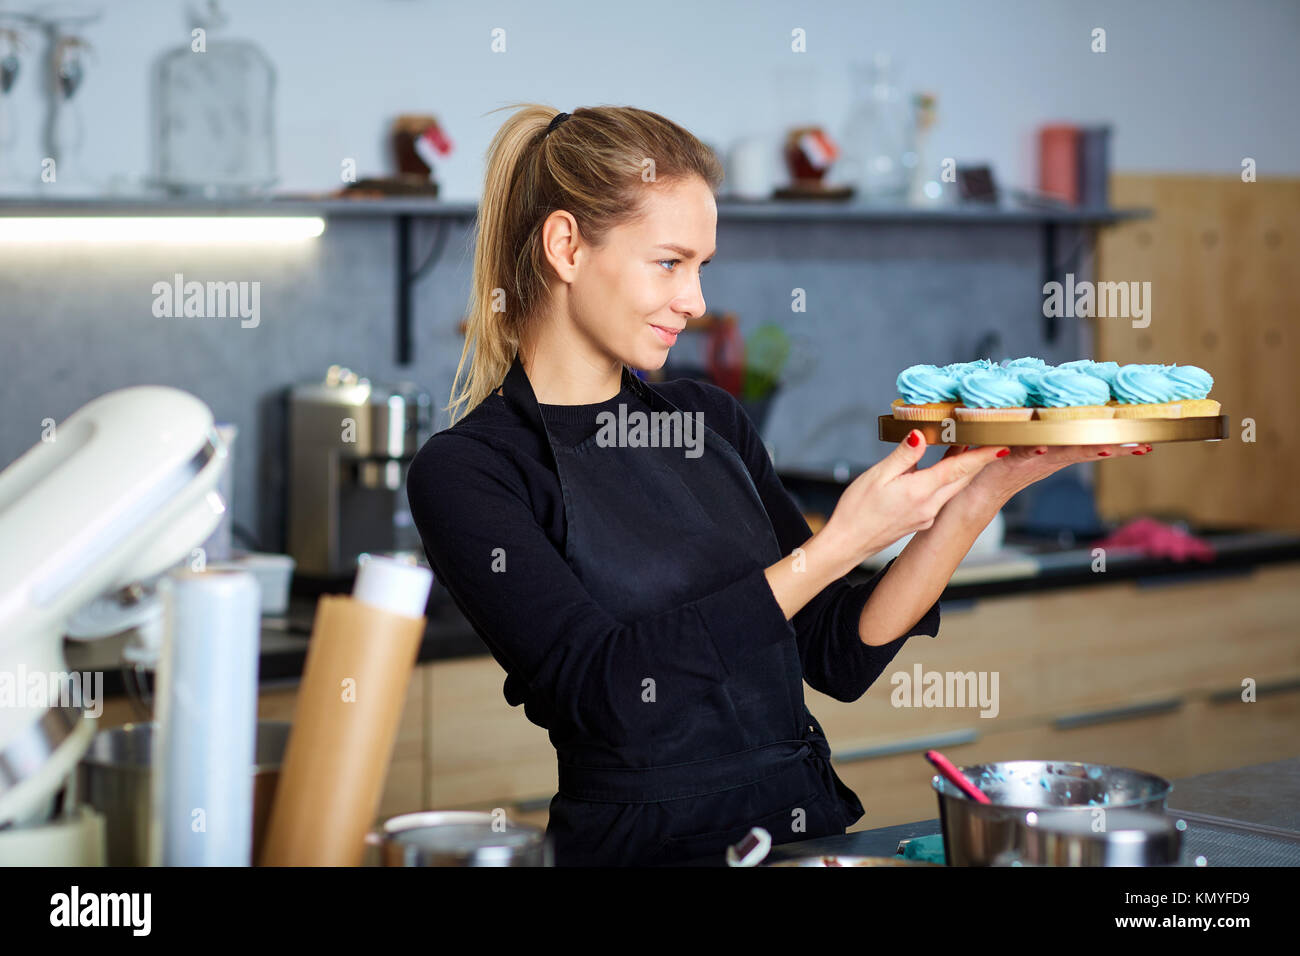 https://c8.alamy.com/comp/KMYFD9/confectioner-pastry-woman-holding-a-tray-of-cupcakes-KMYFD9.jpg